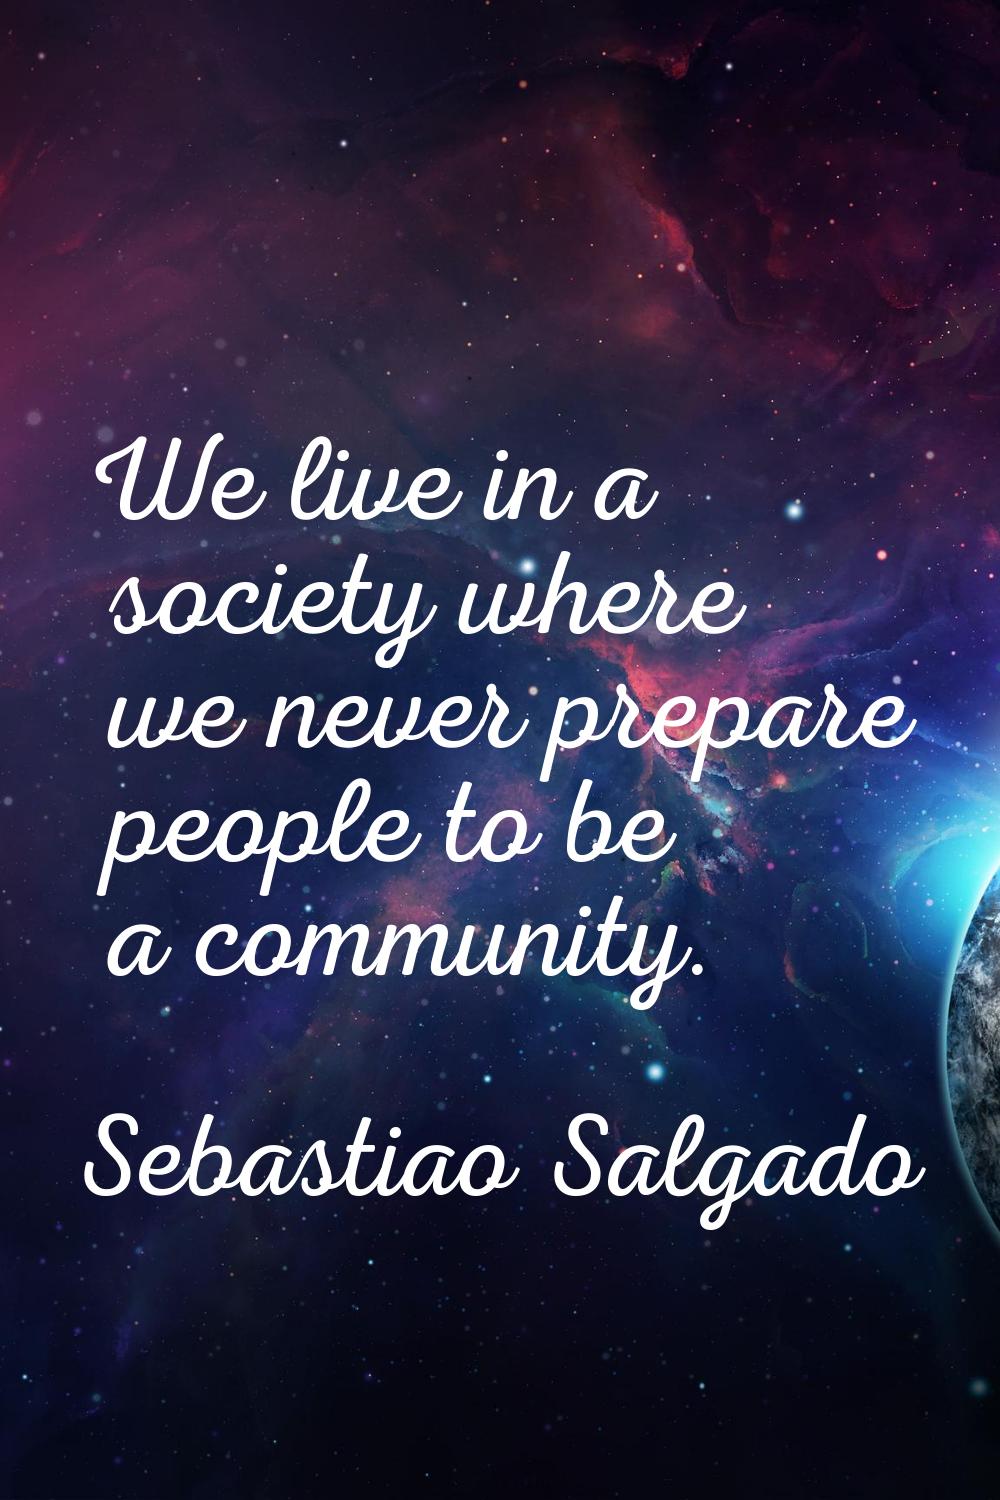 We live in a society where we never prepare people to be a community.